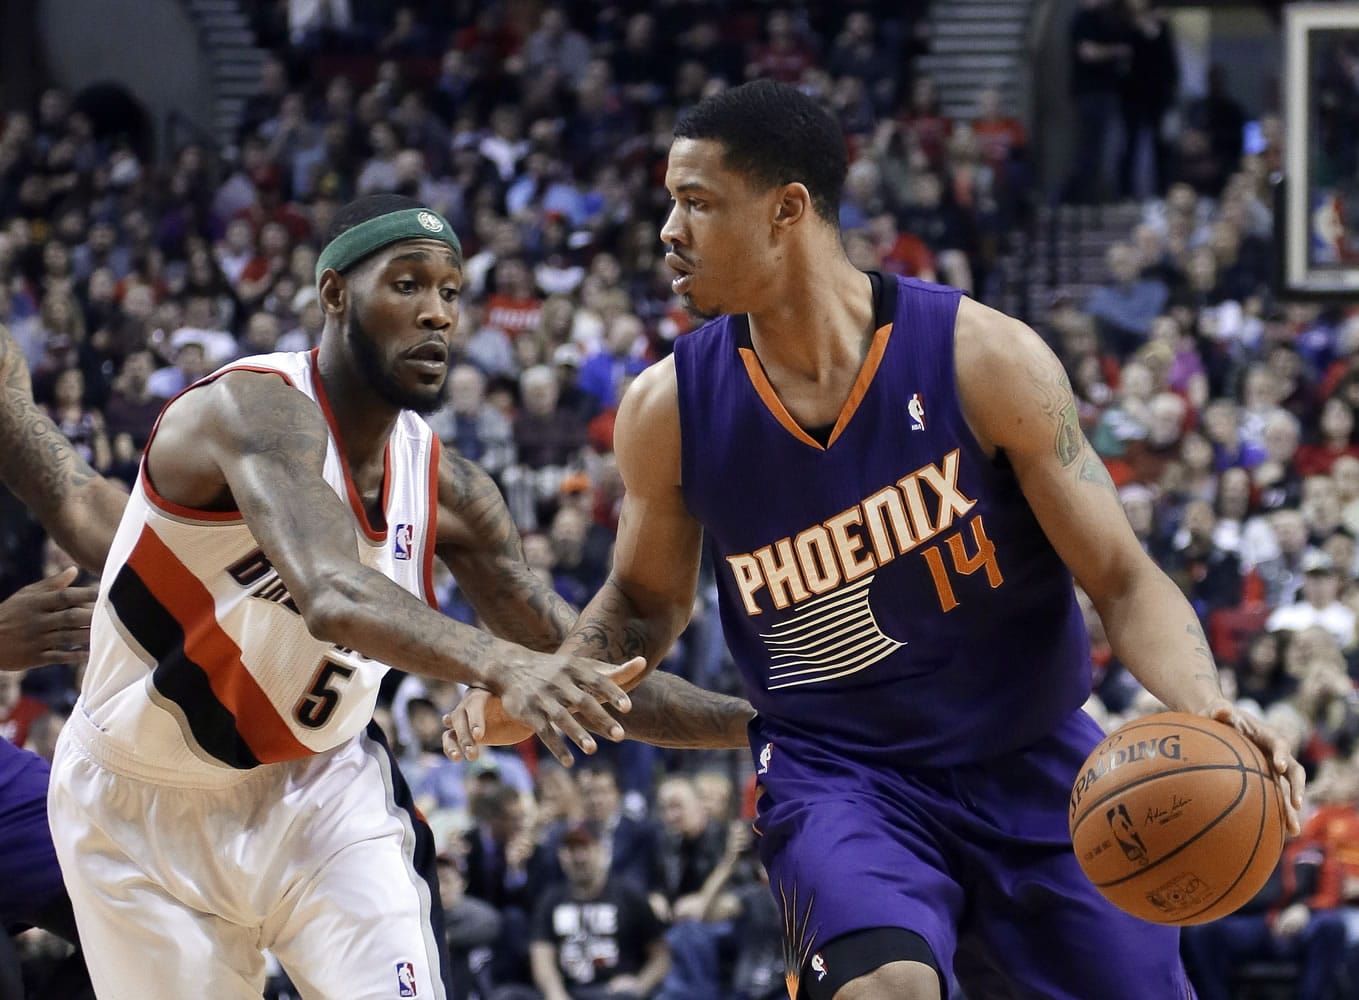 Phoenix Suns forward Gerald Green, right, dribbles against Portland Trail Blazers guard Will Barton during the first half of an NBA basketball game in Portland, Ore., Friday, April 4, 2014.